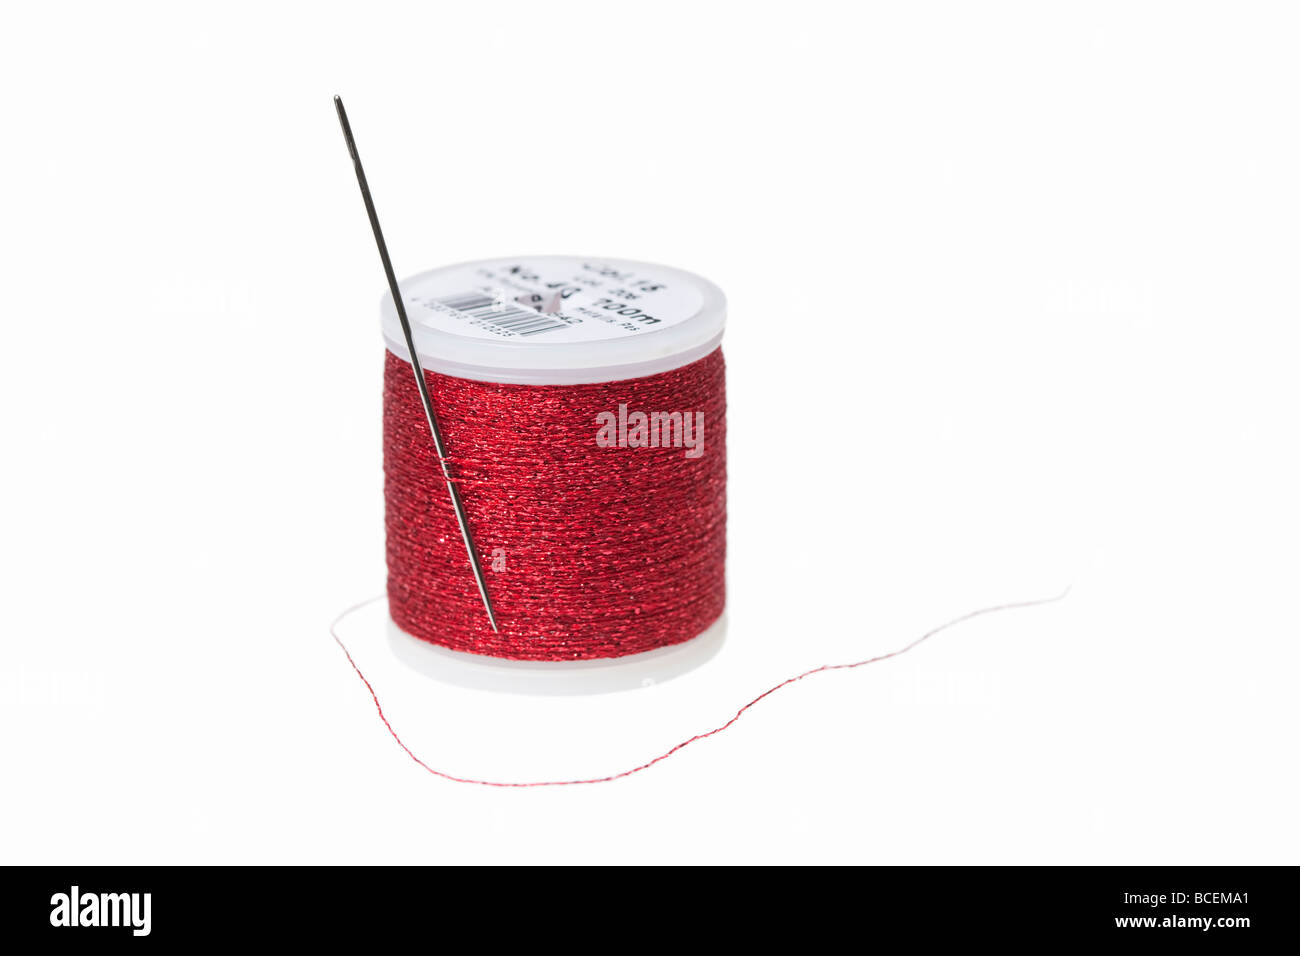 Sewing needle and a reel of metallic red thread against a white background Stock Photo